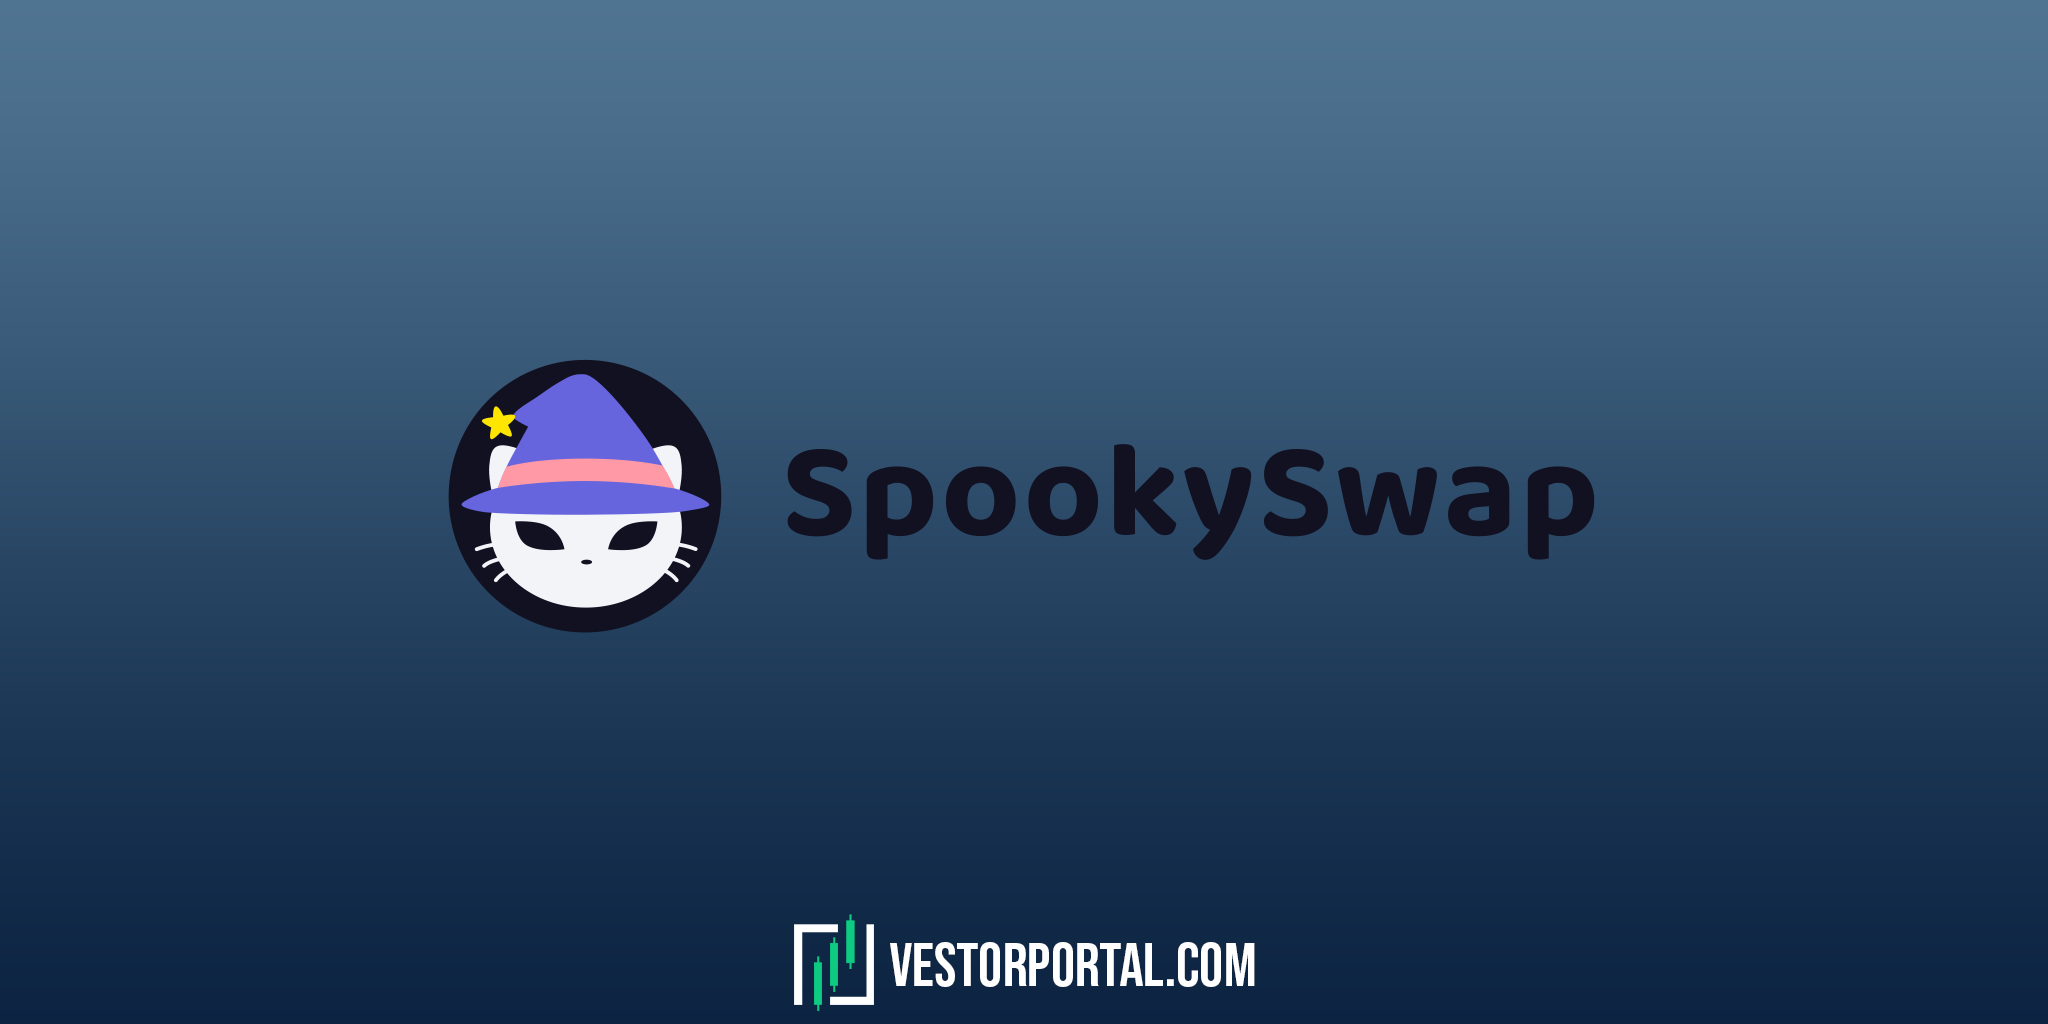 How to use SpookySwap?